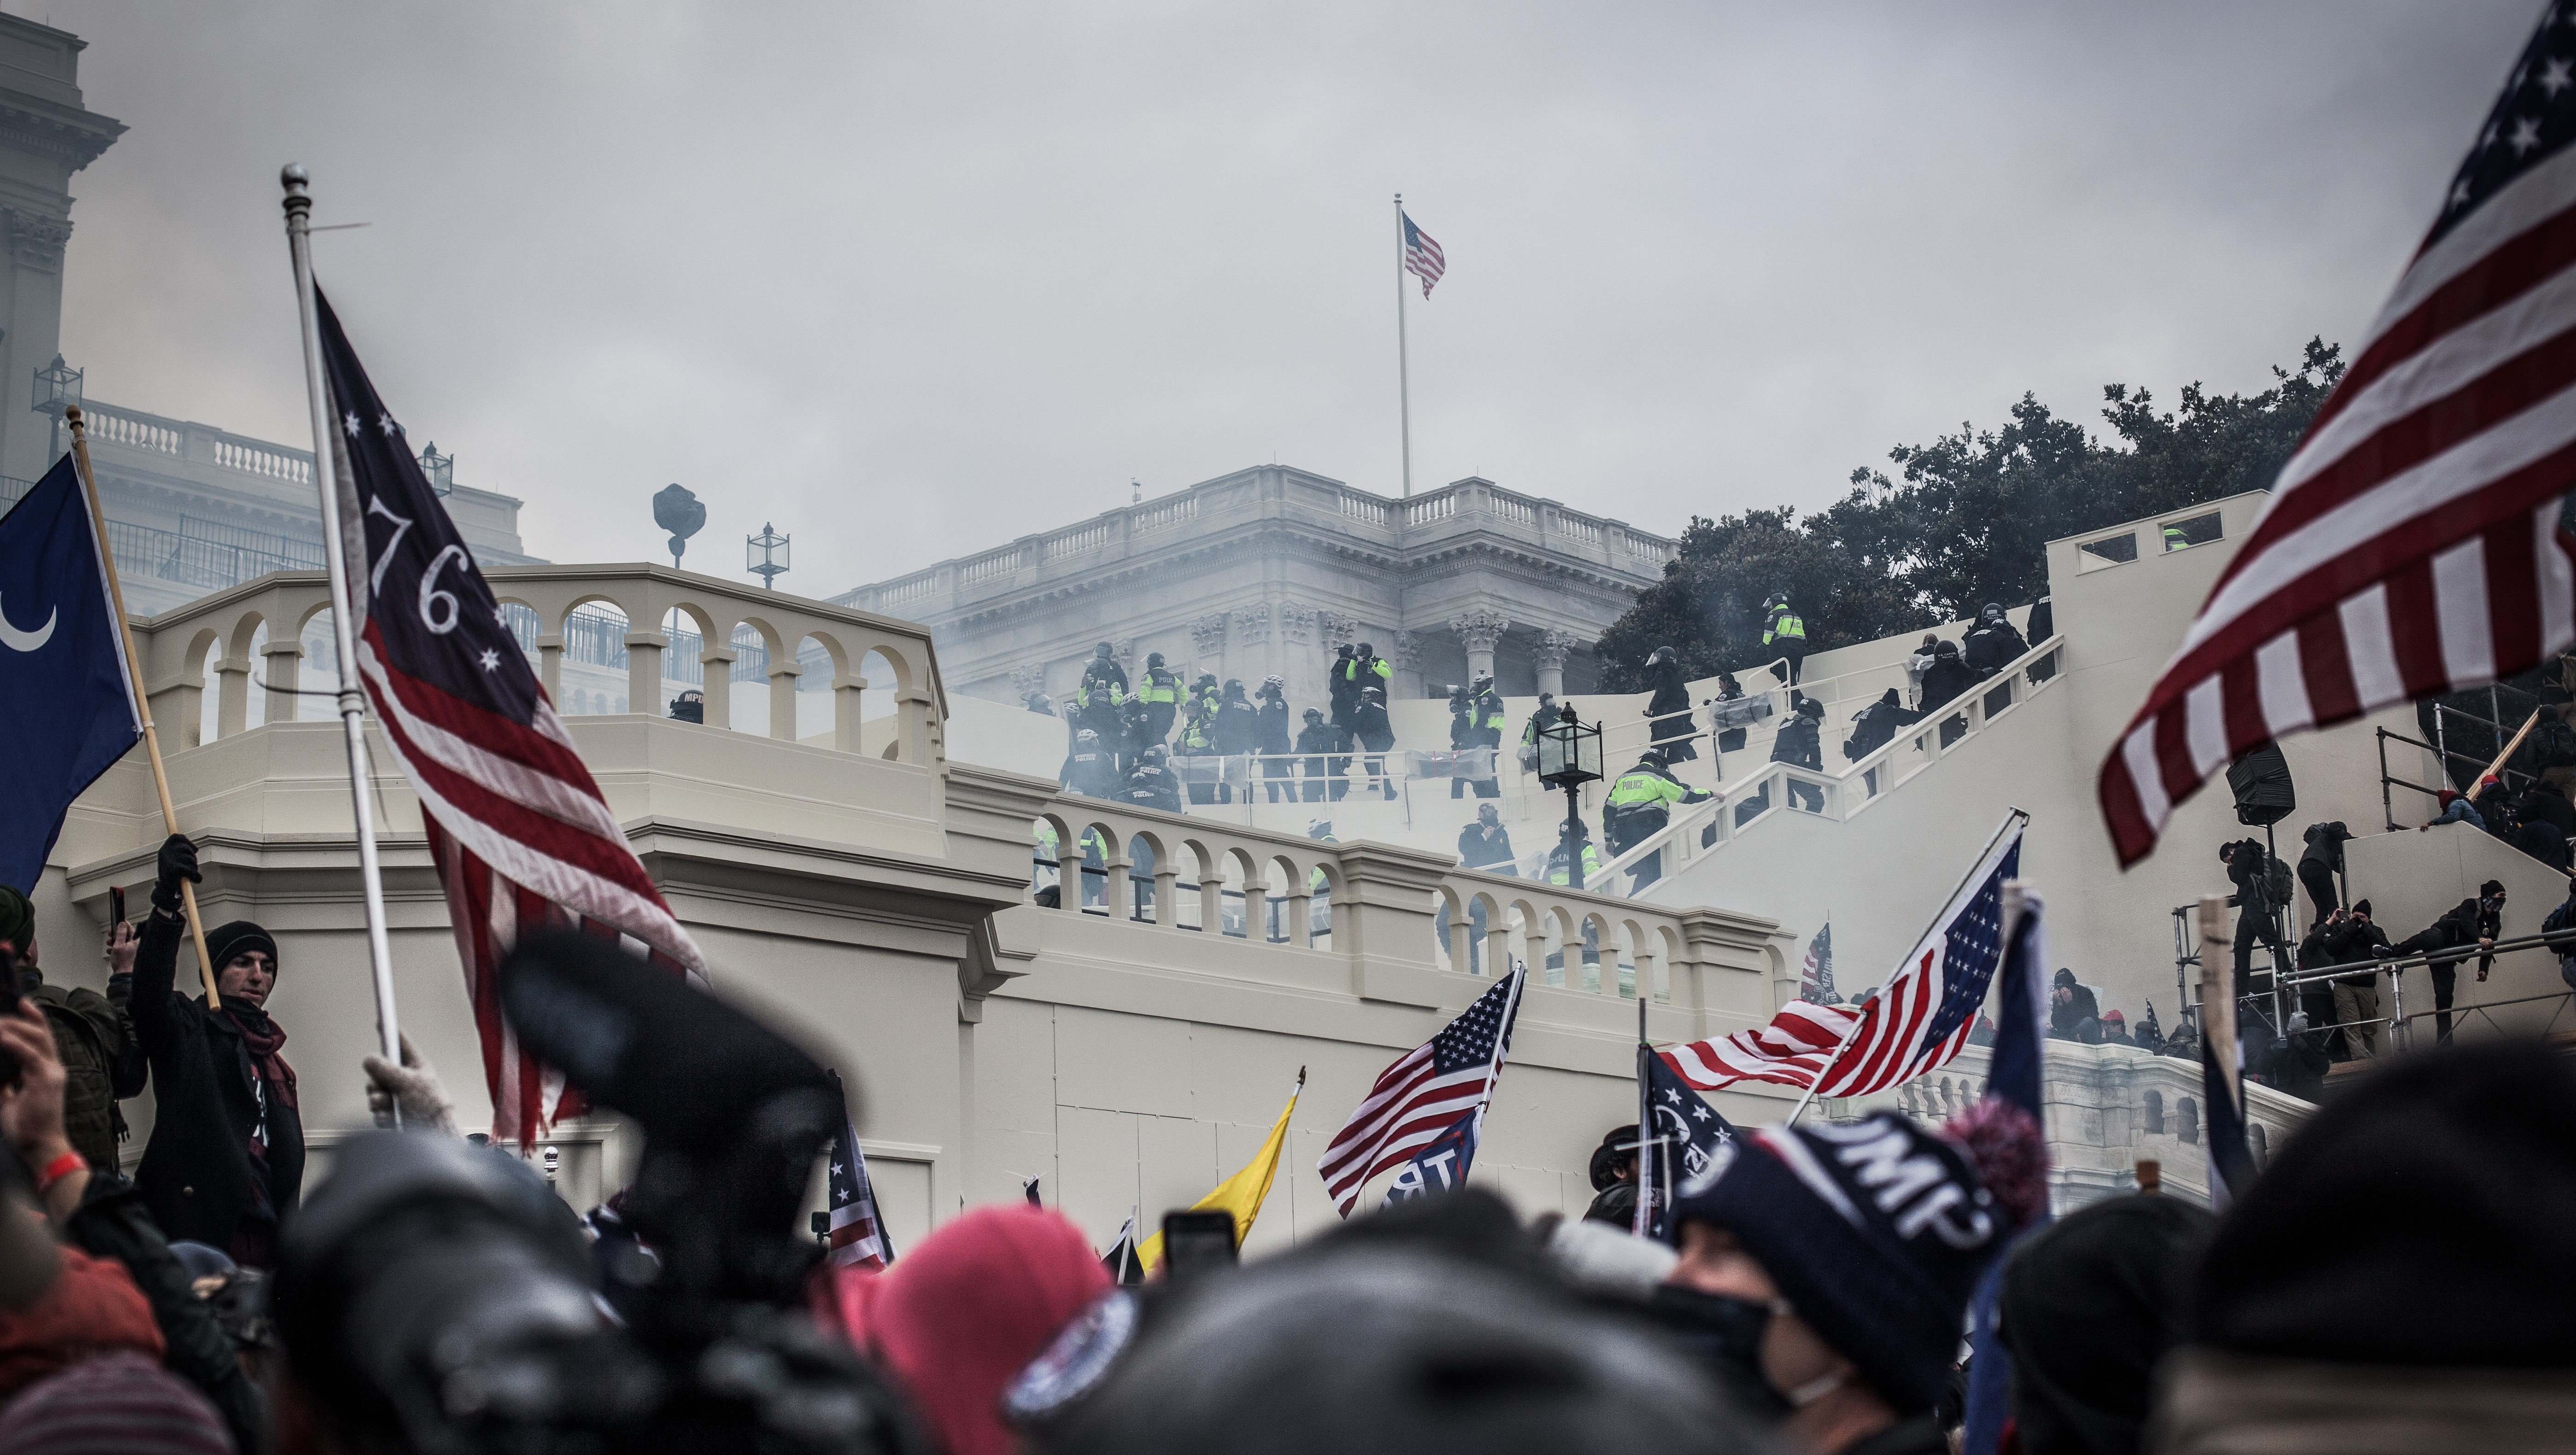 I was at the Capitol on January 6: This is what I saw